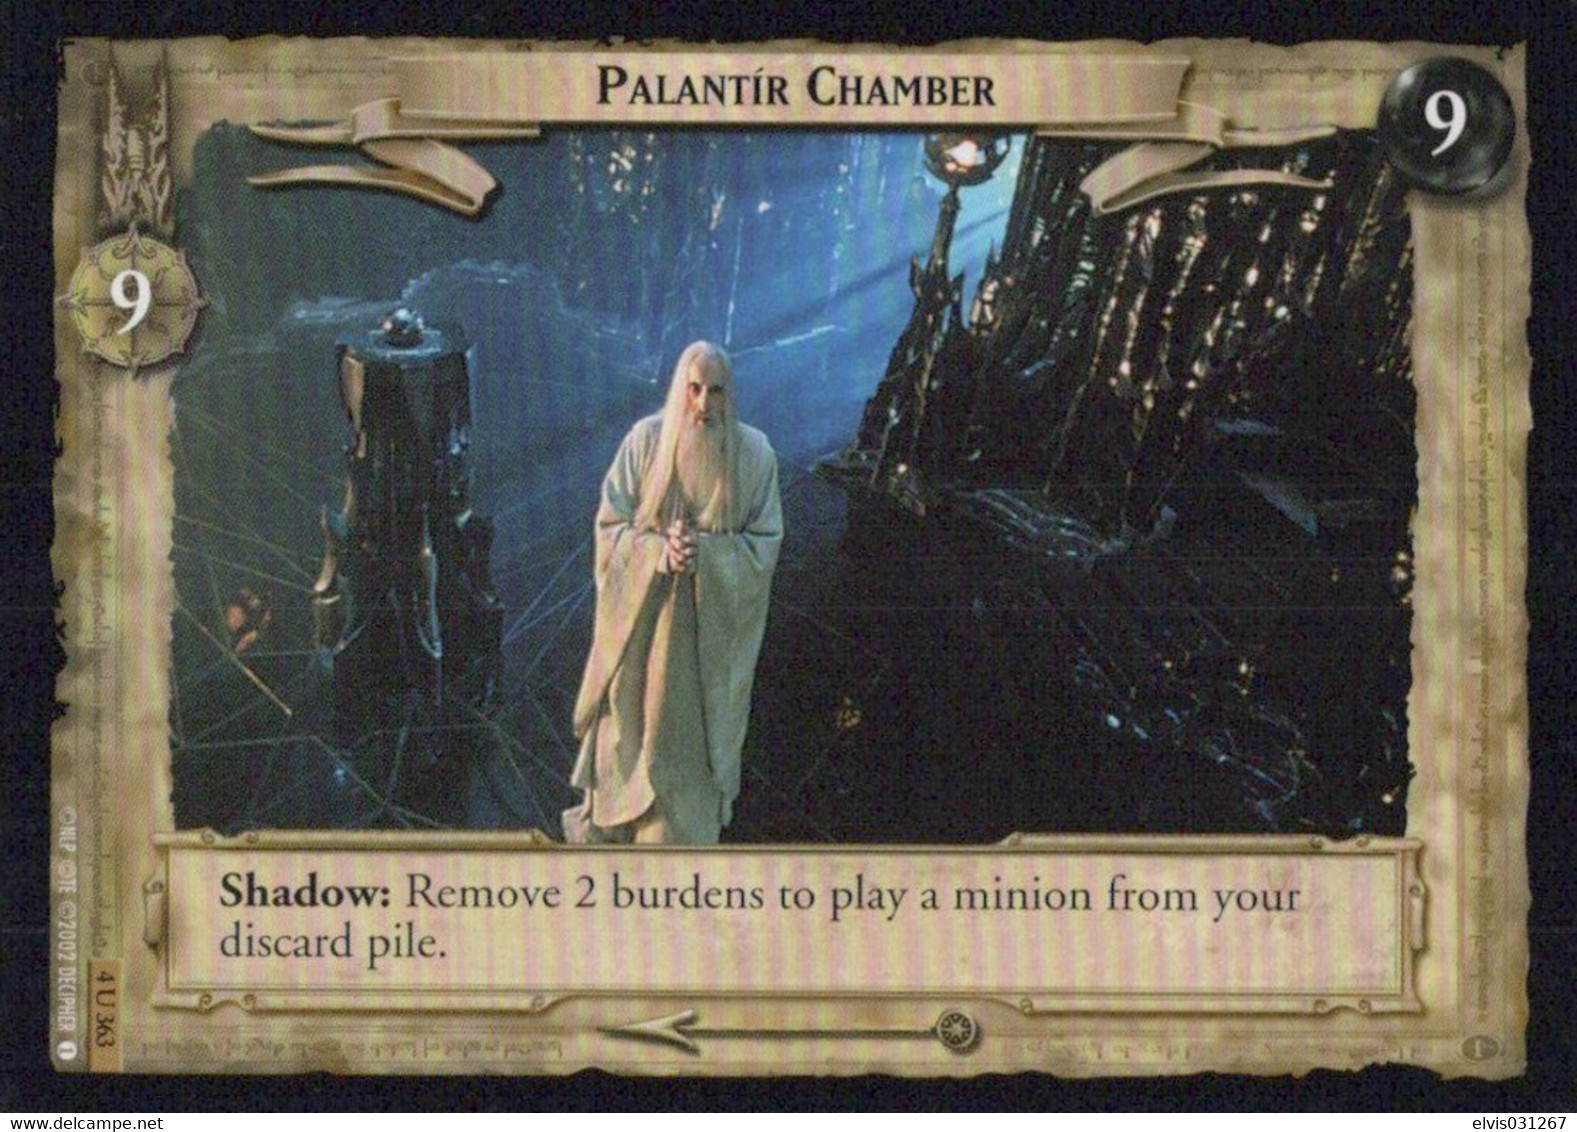 Vintage The Lord Of The Rings: #9-9 Palantir Chamber - EN - 2001-2004 - Mint Condition - Trading Card Game - Lord Of The Rings